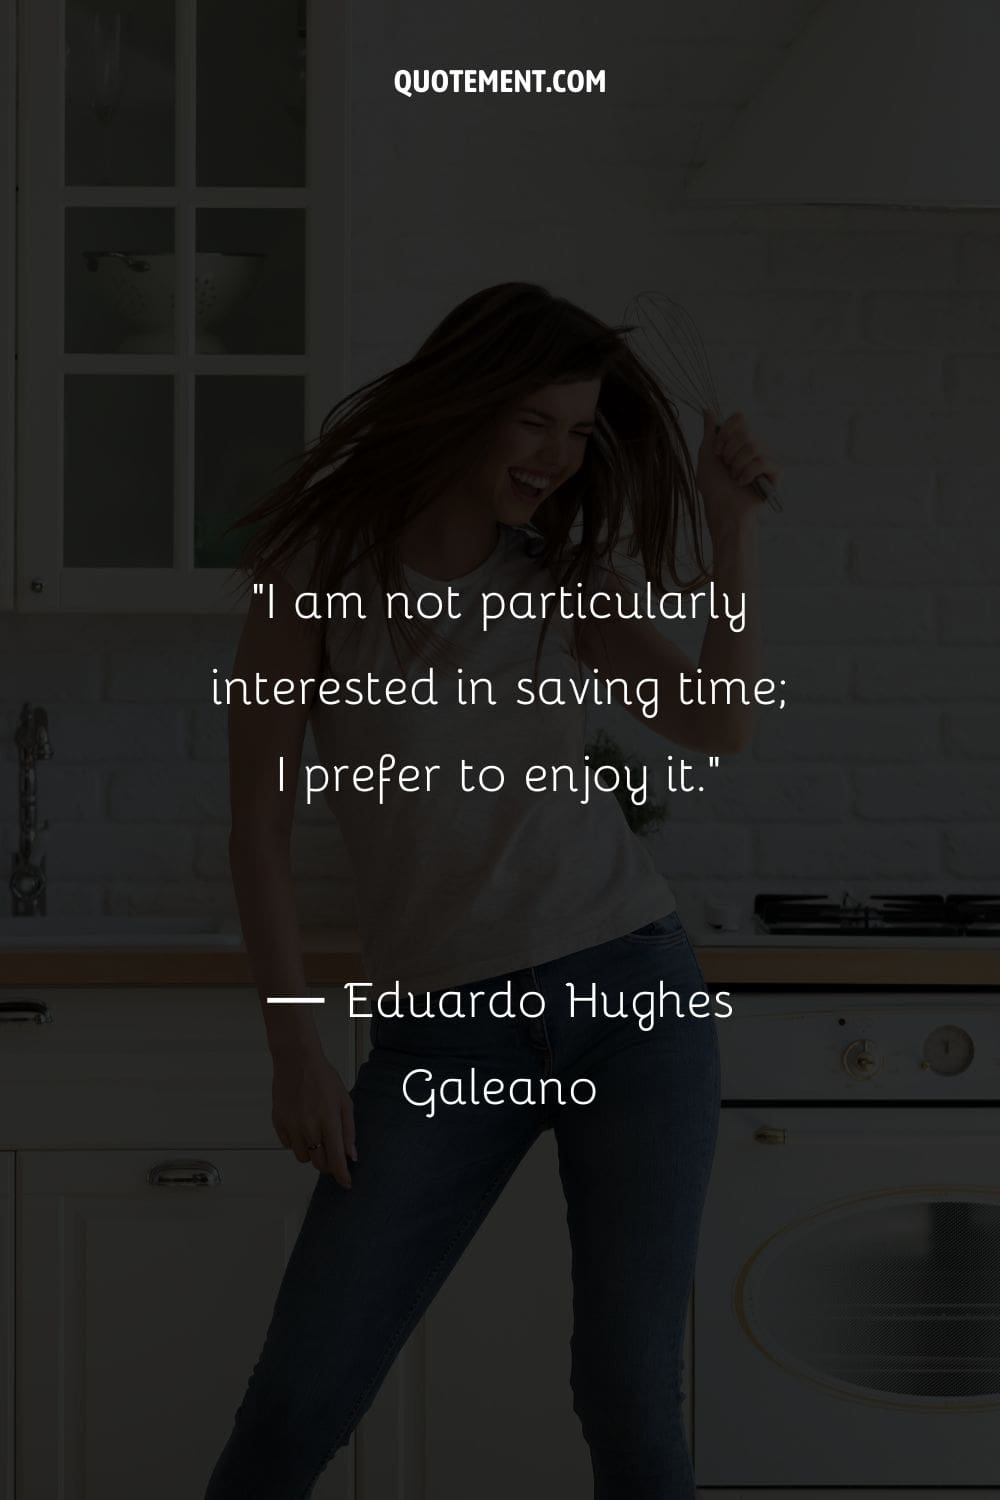 I am not particularly interested in saving time; I prefer to enjoy it.